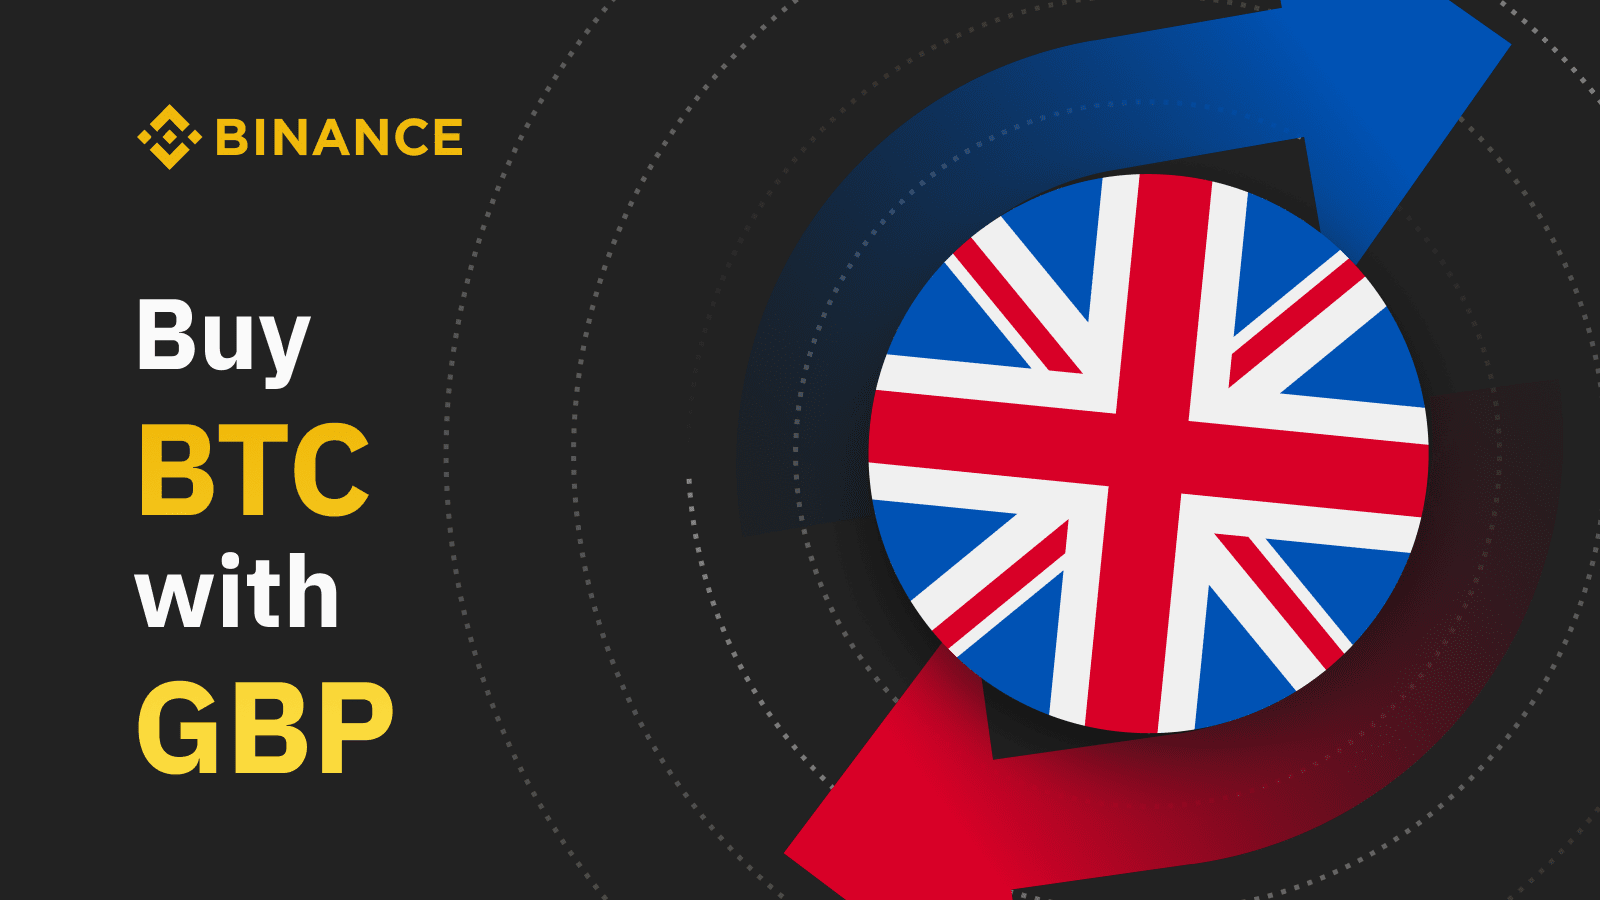 How to Buy Bitcoin in the UK: A Binance Guide (2021 Update)